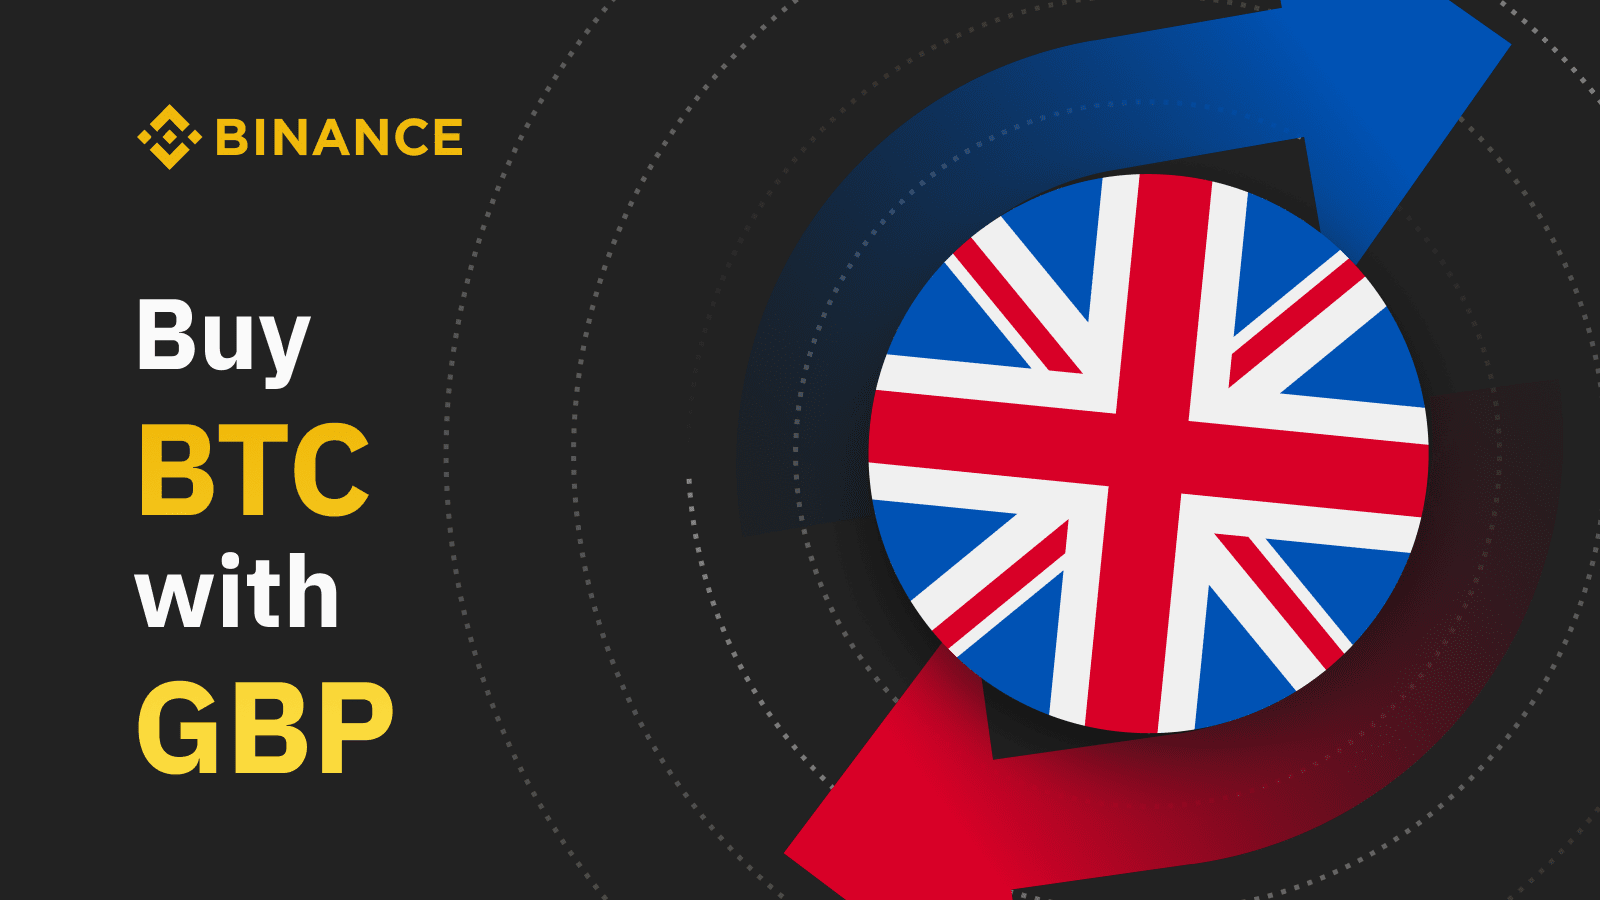 How to Buy Bitcoin in the UK: A Binance Guide (2021 Update)